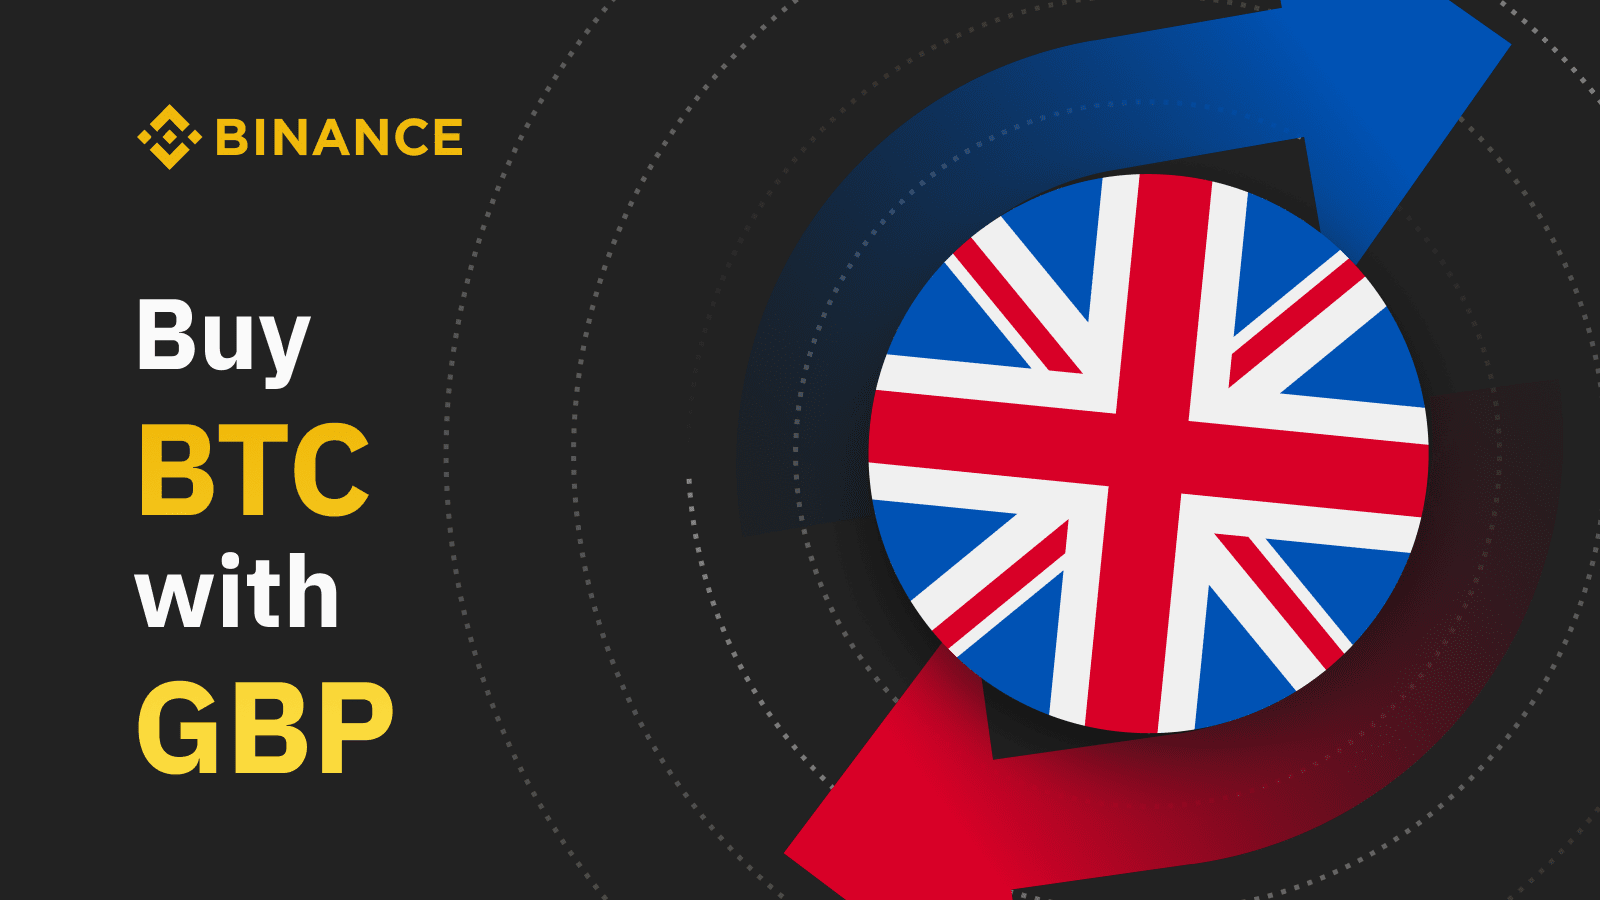 How to Buy Bitcoin in the UK: A Binance Guide (2021 Update)